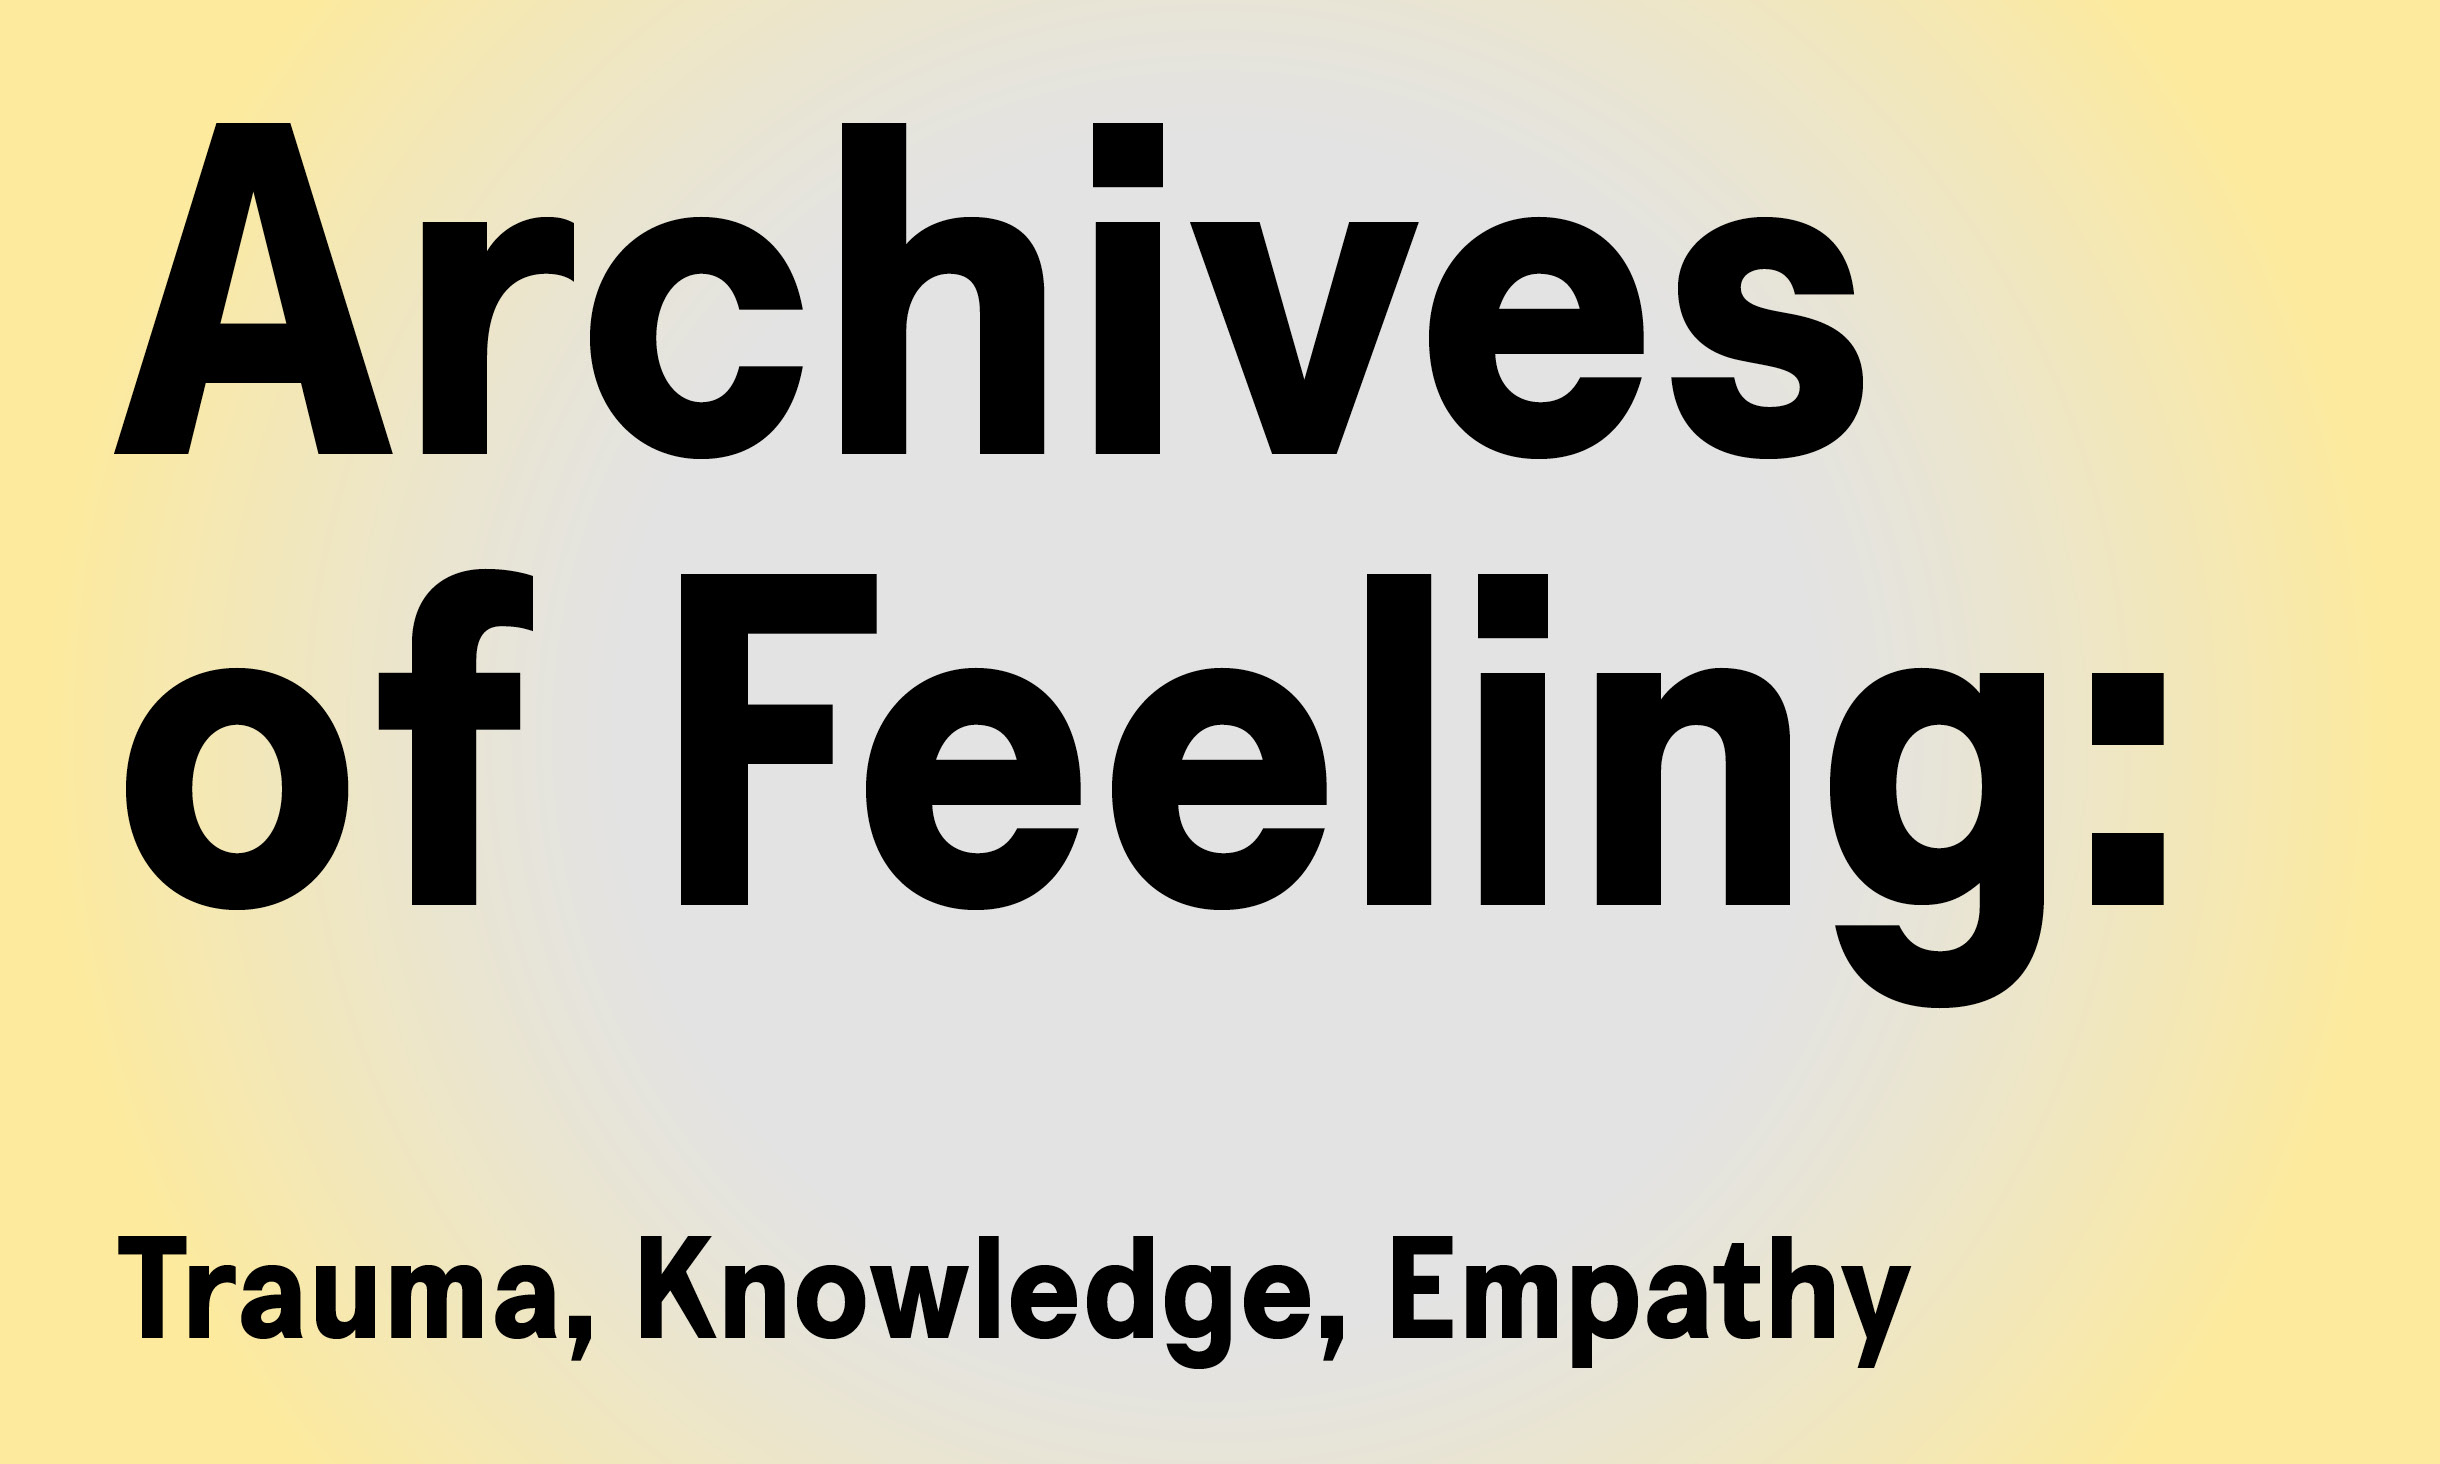 Archives of Feeling: Trauma, Knowledge, Empathy at RMIT Gallery from 21 September to 10 December 2022